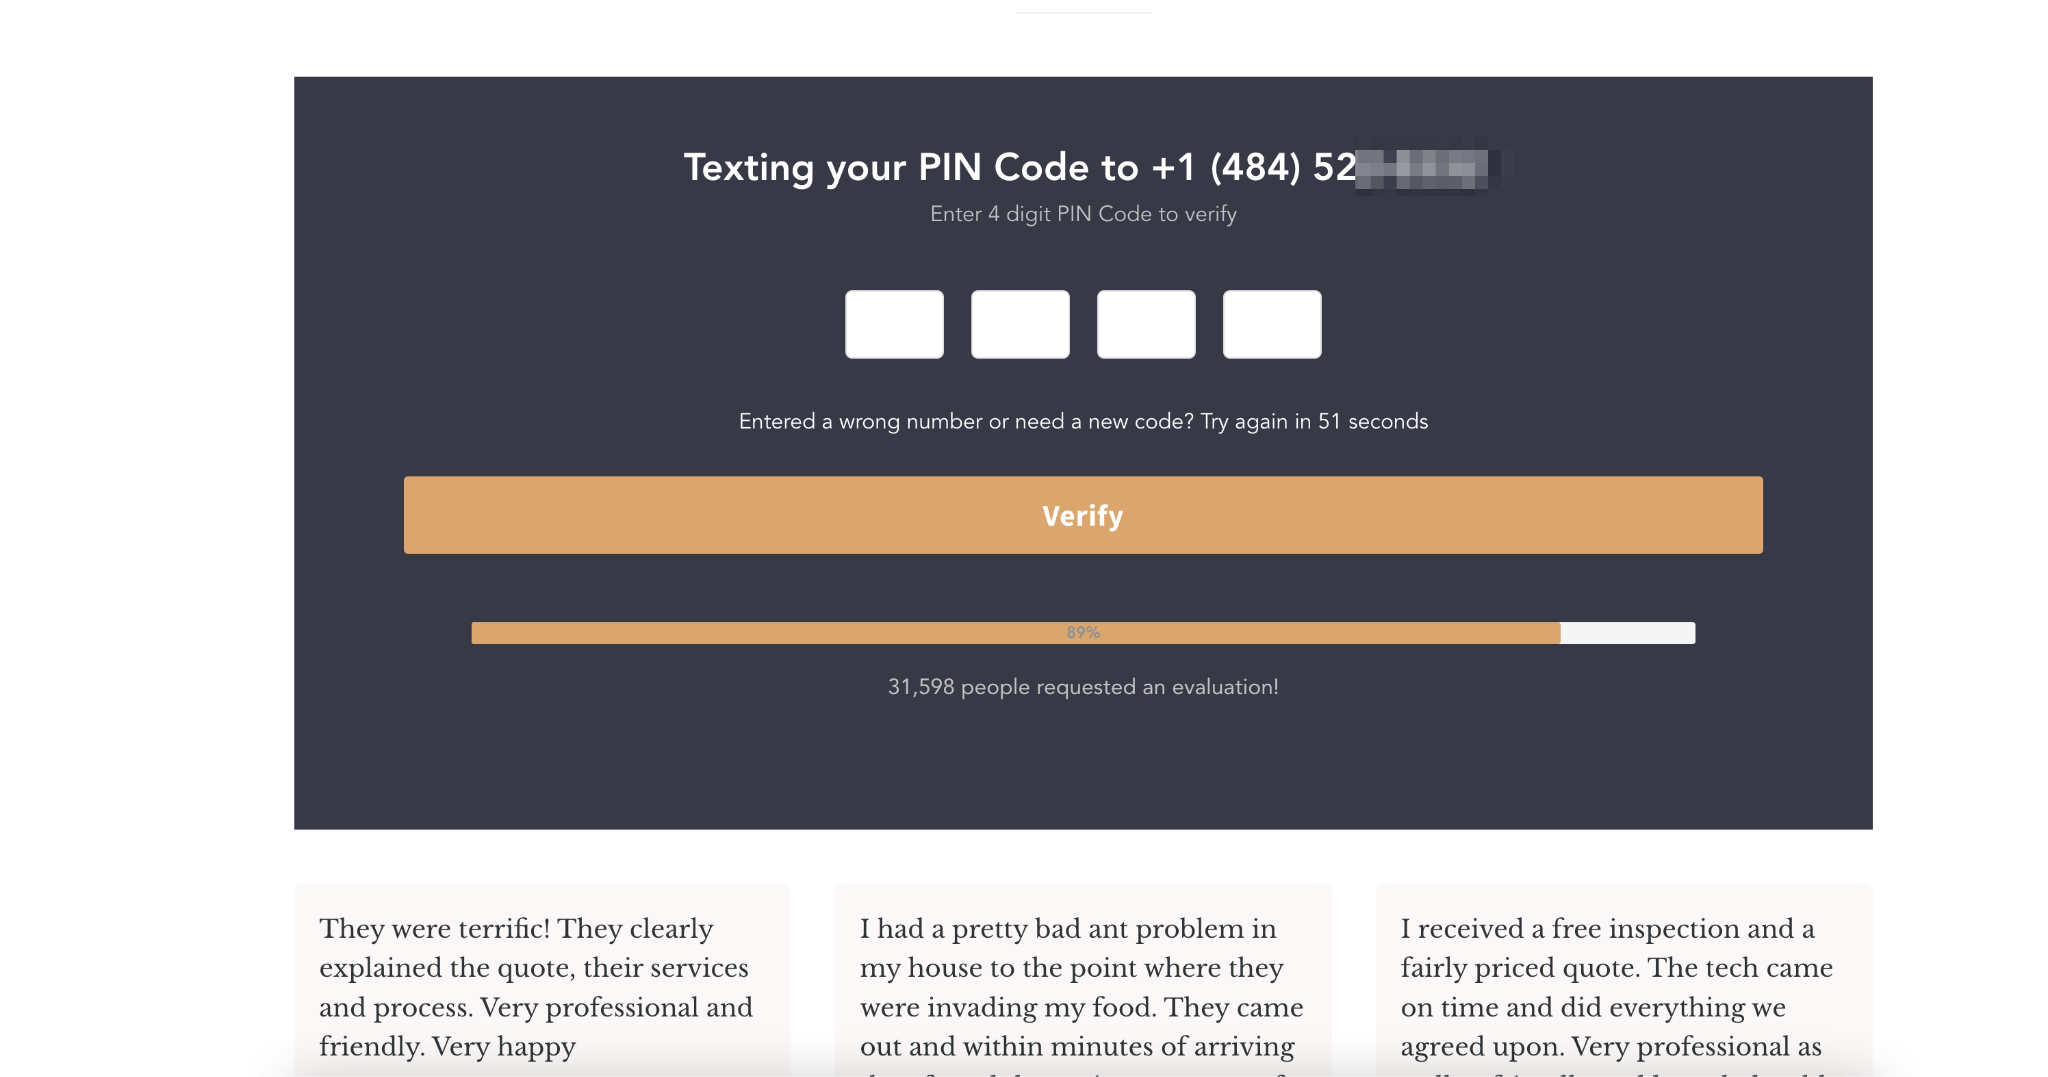 otp pin verification in your form